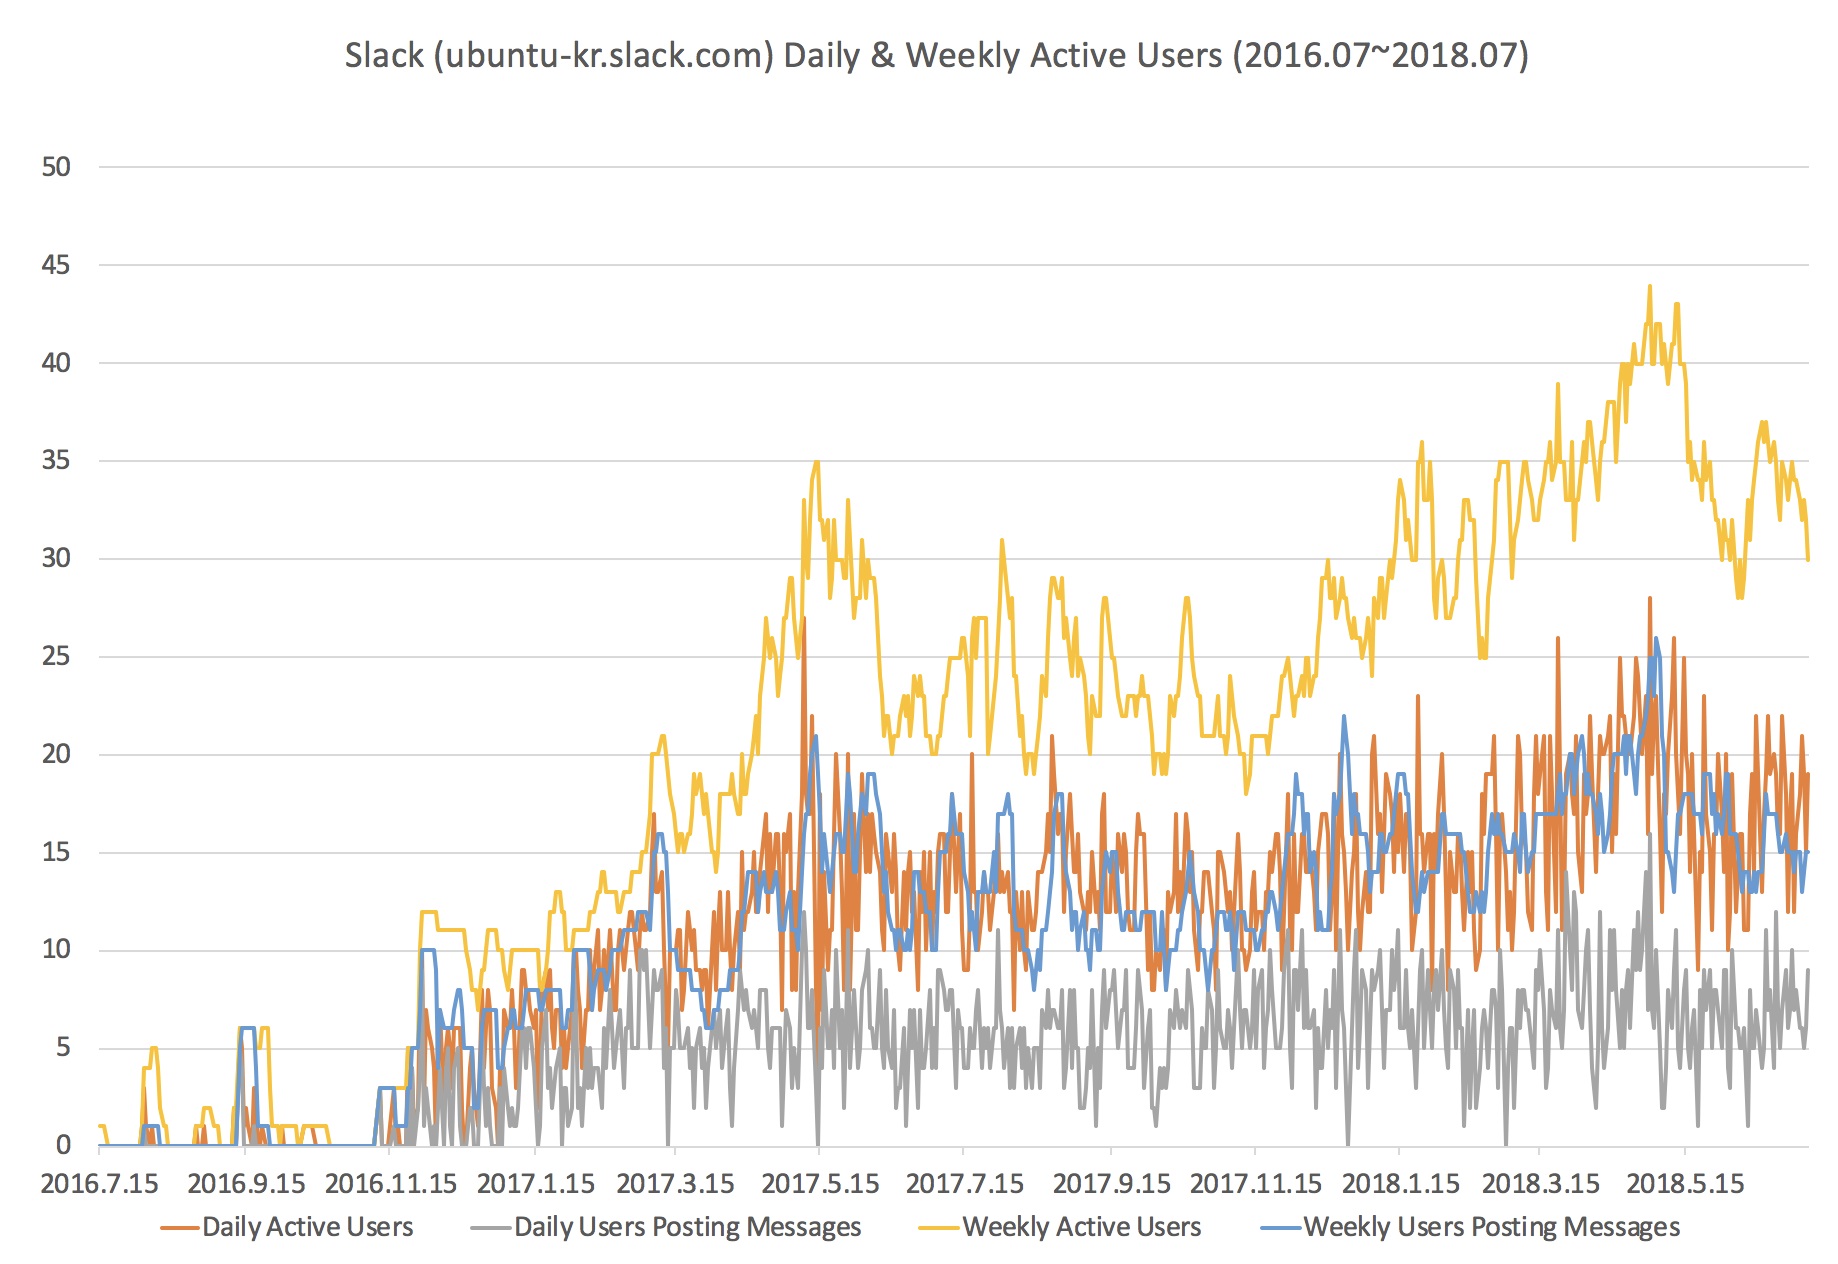 Slack weekly & daily active users